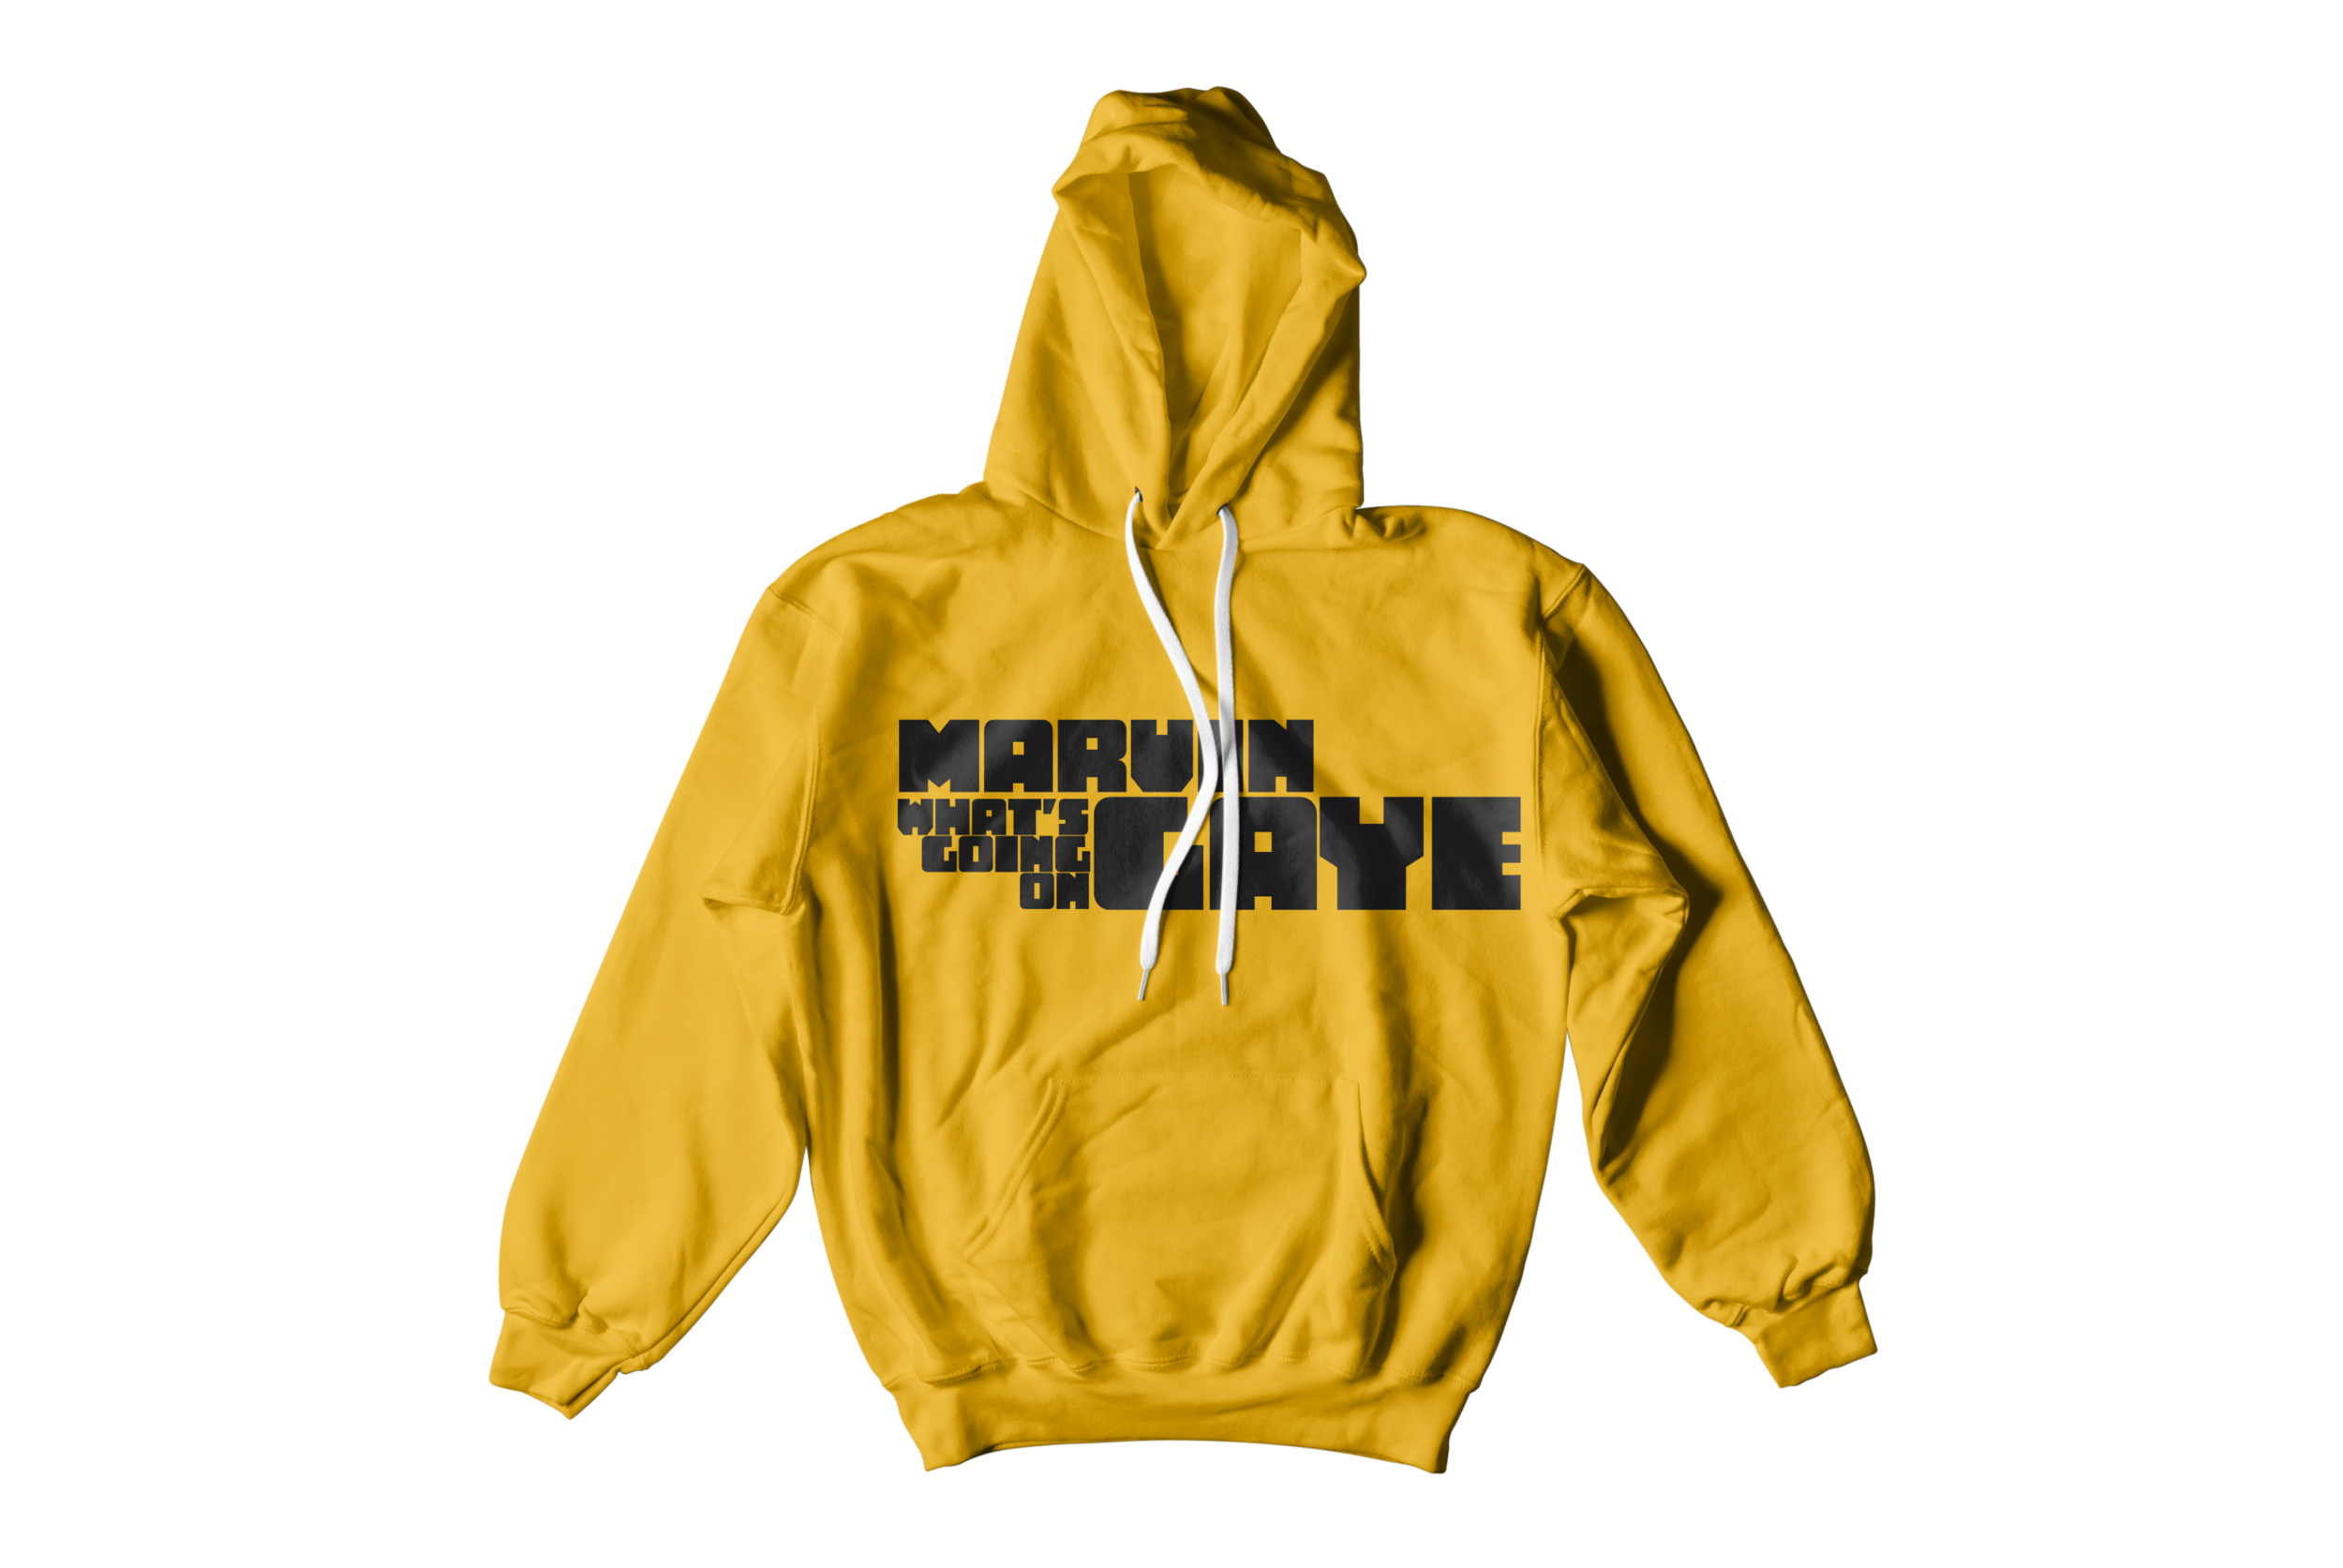 all in one_Hoodie Mock-up_CHUCK.png